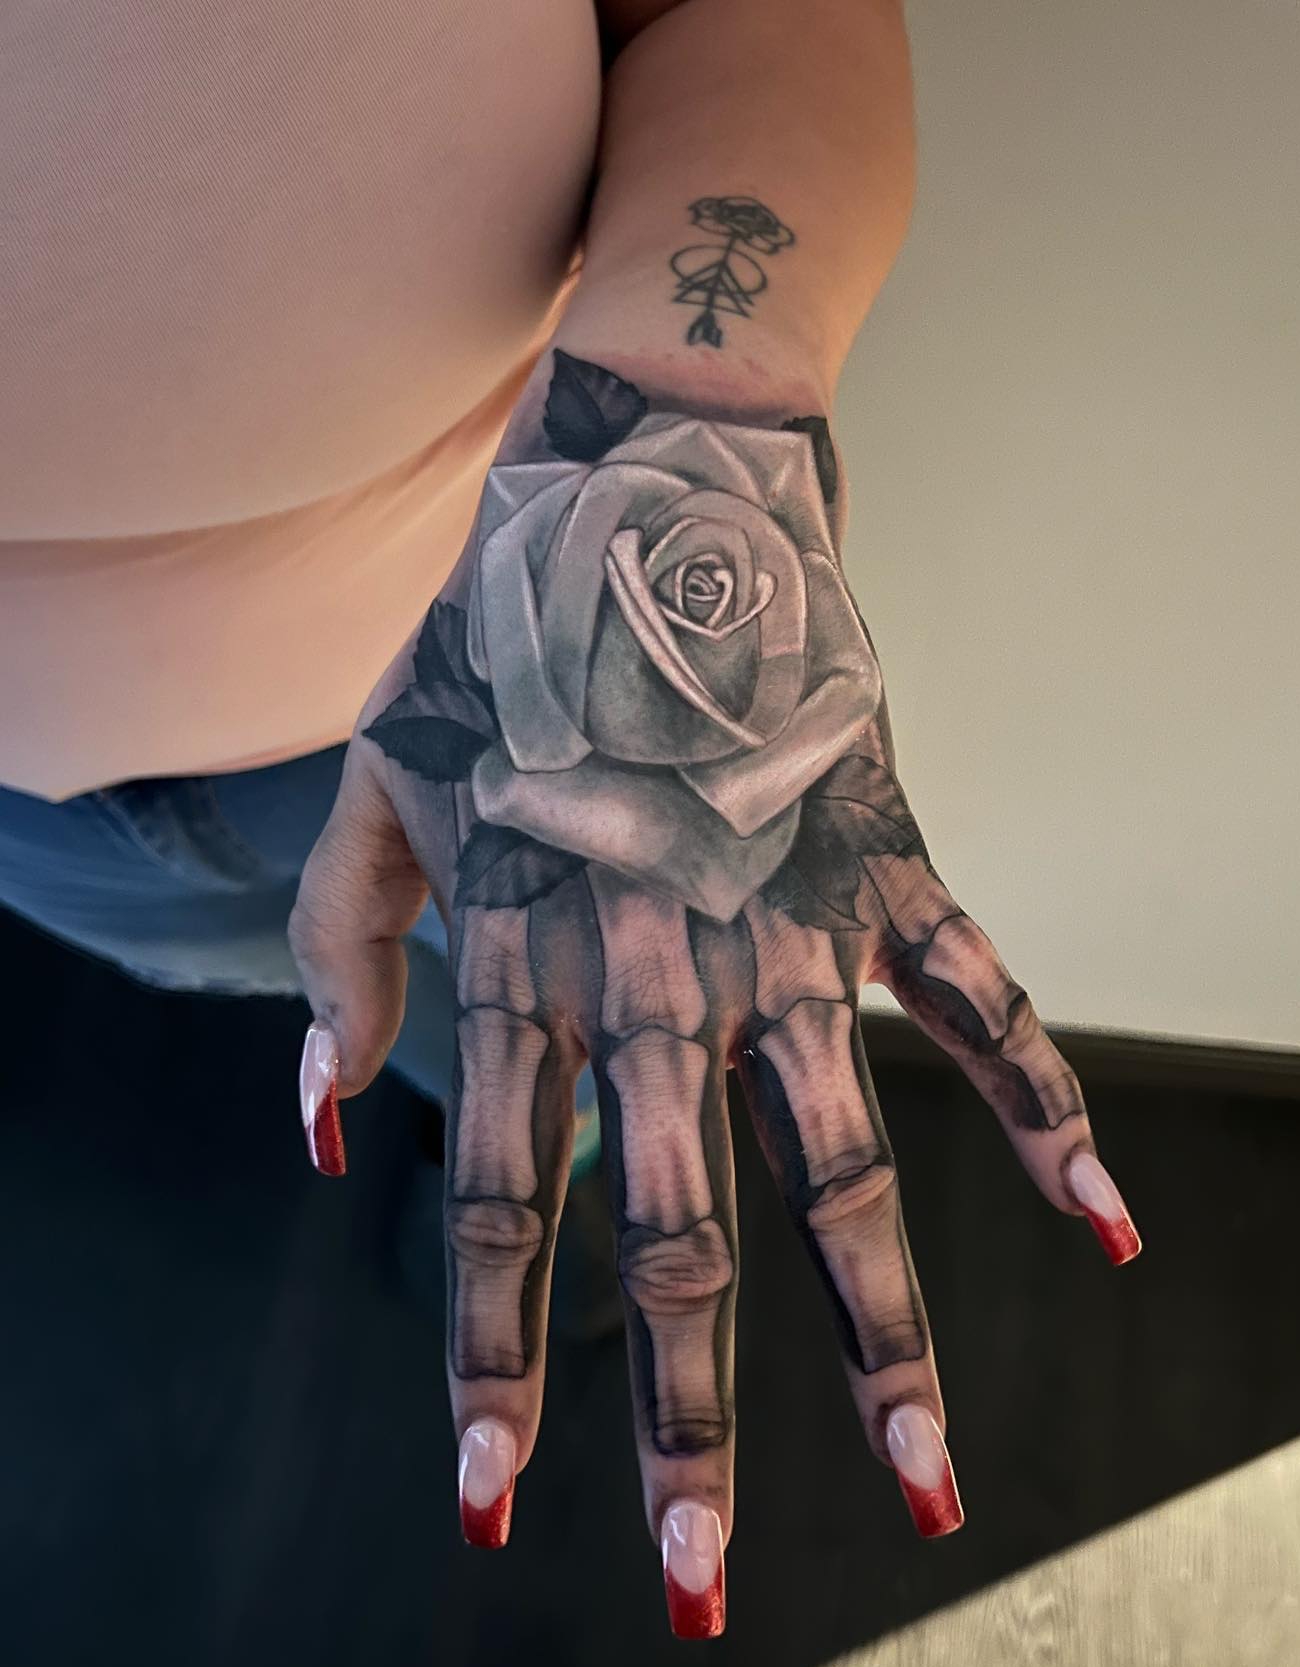 3D Rose and Skeleton Tattoo on Hand